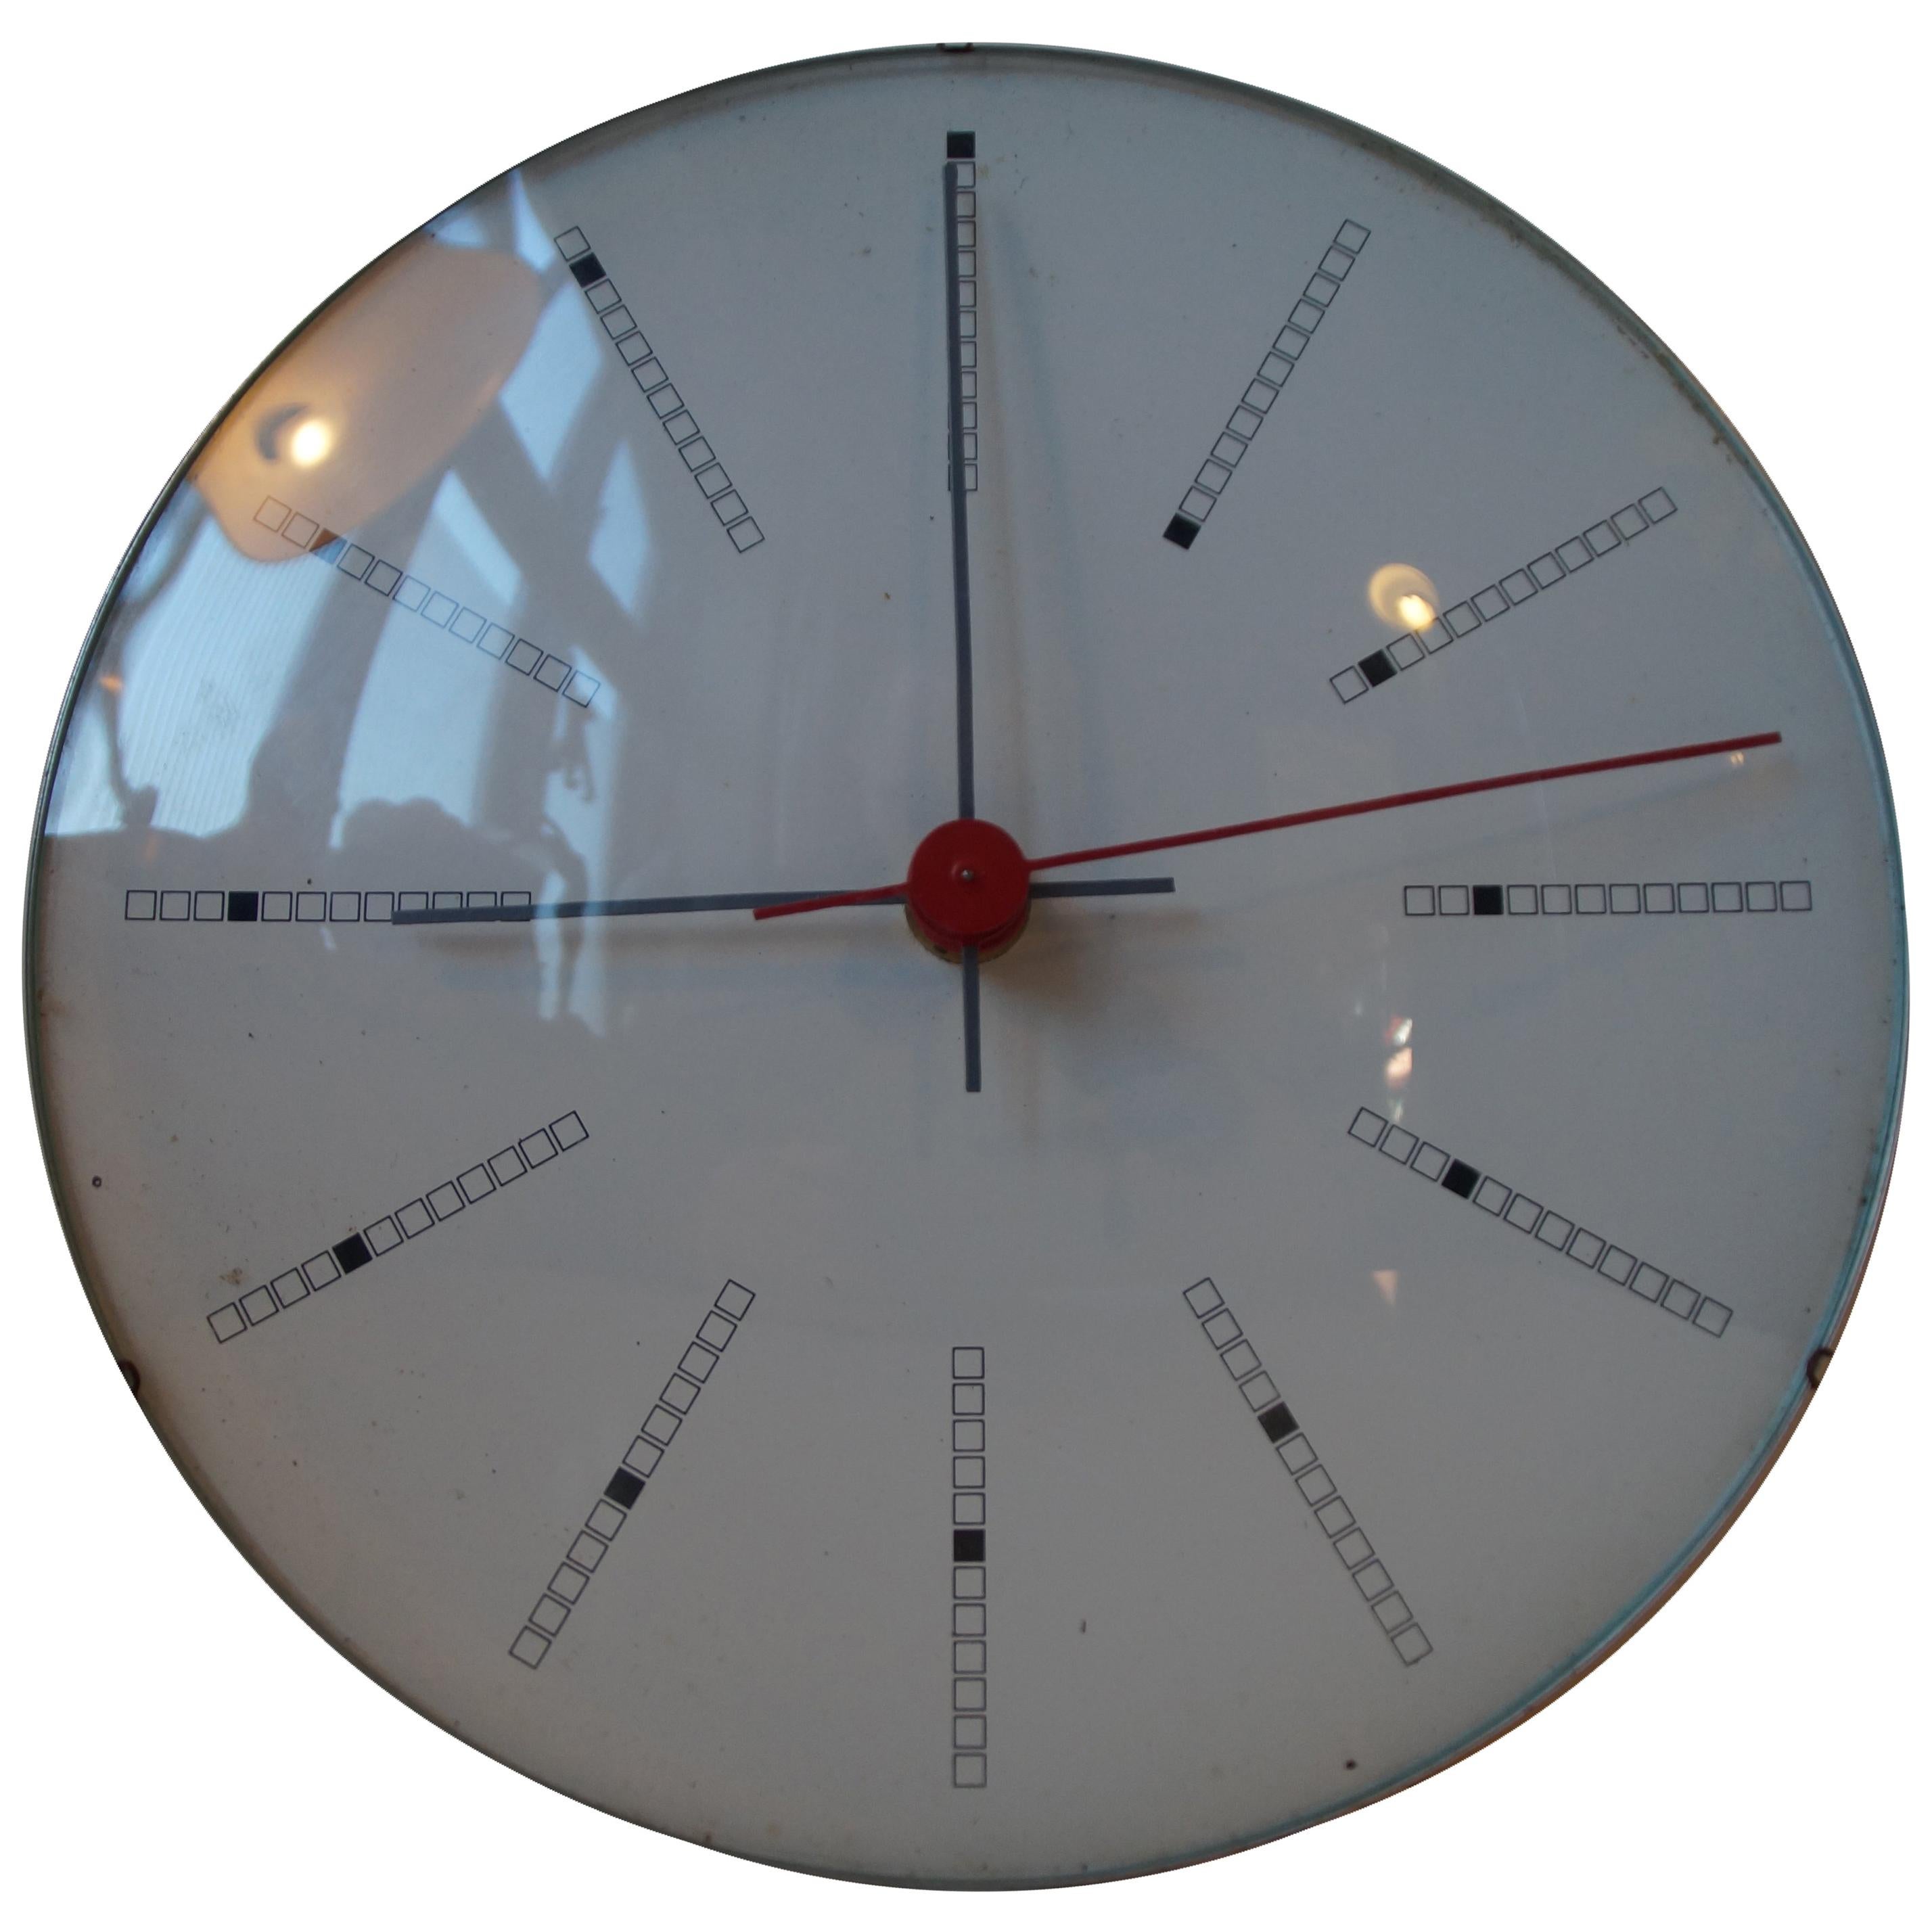 Rare Bankers Wall Clock by Arne Jacobsen for Gefa, 1971